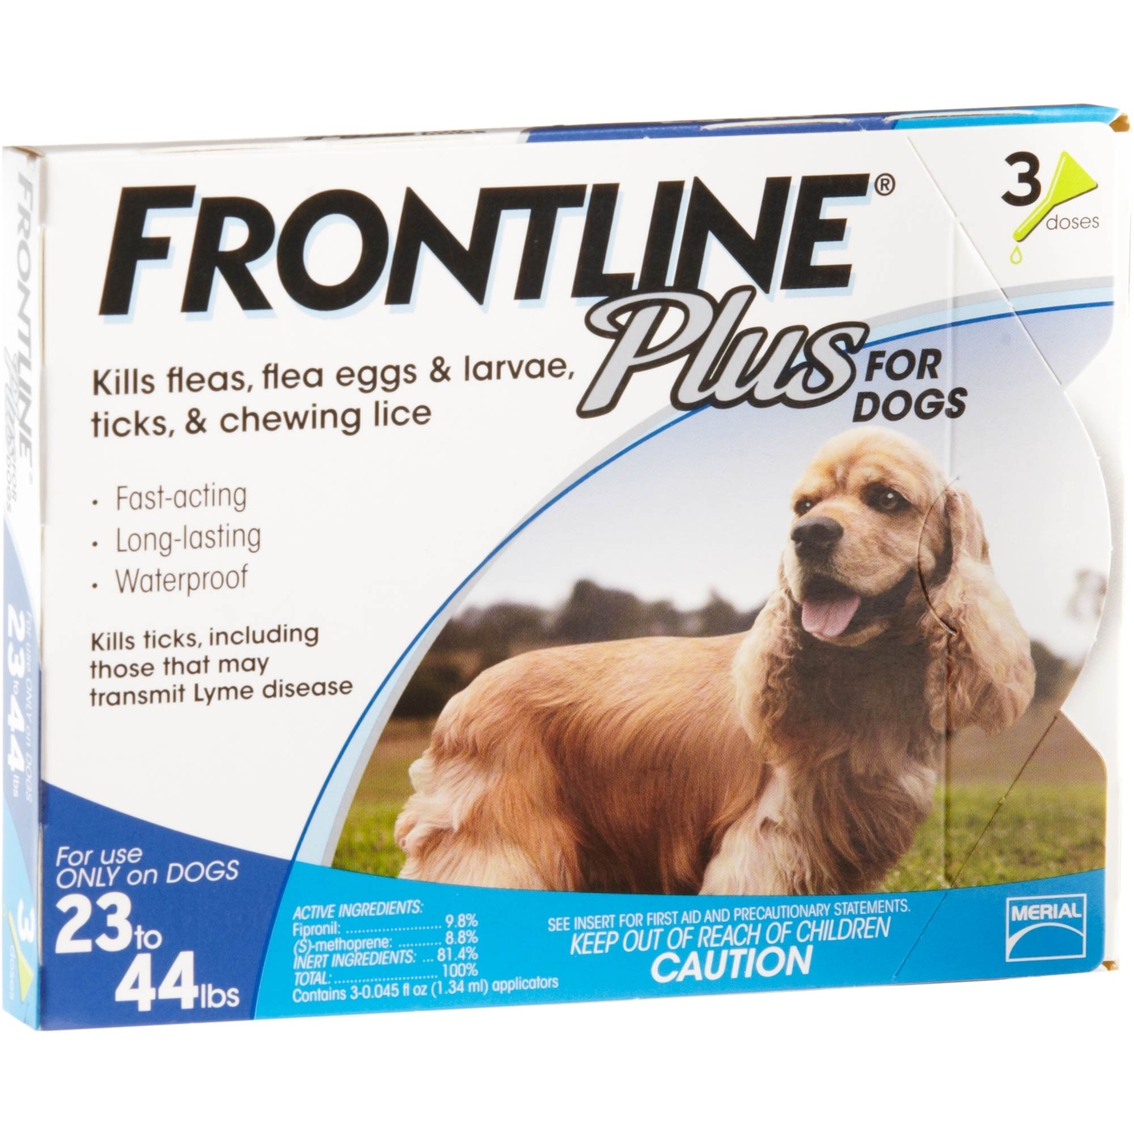 Frontline Plus for Dogs 3 pk. - Image 2 of 4